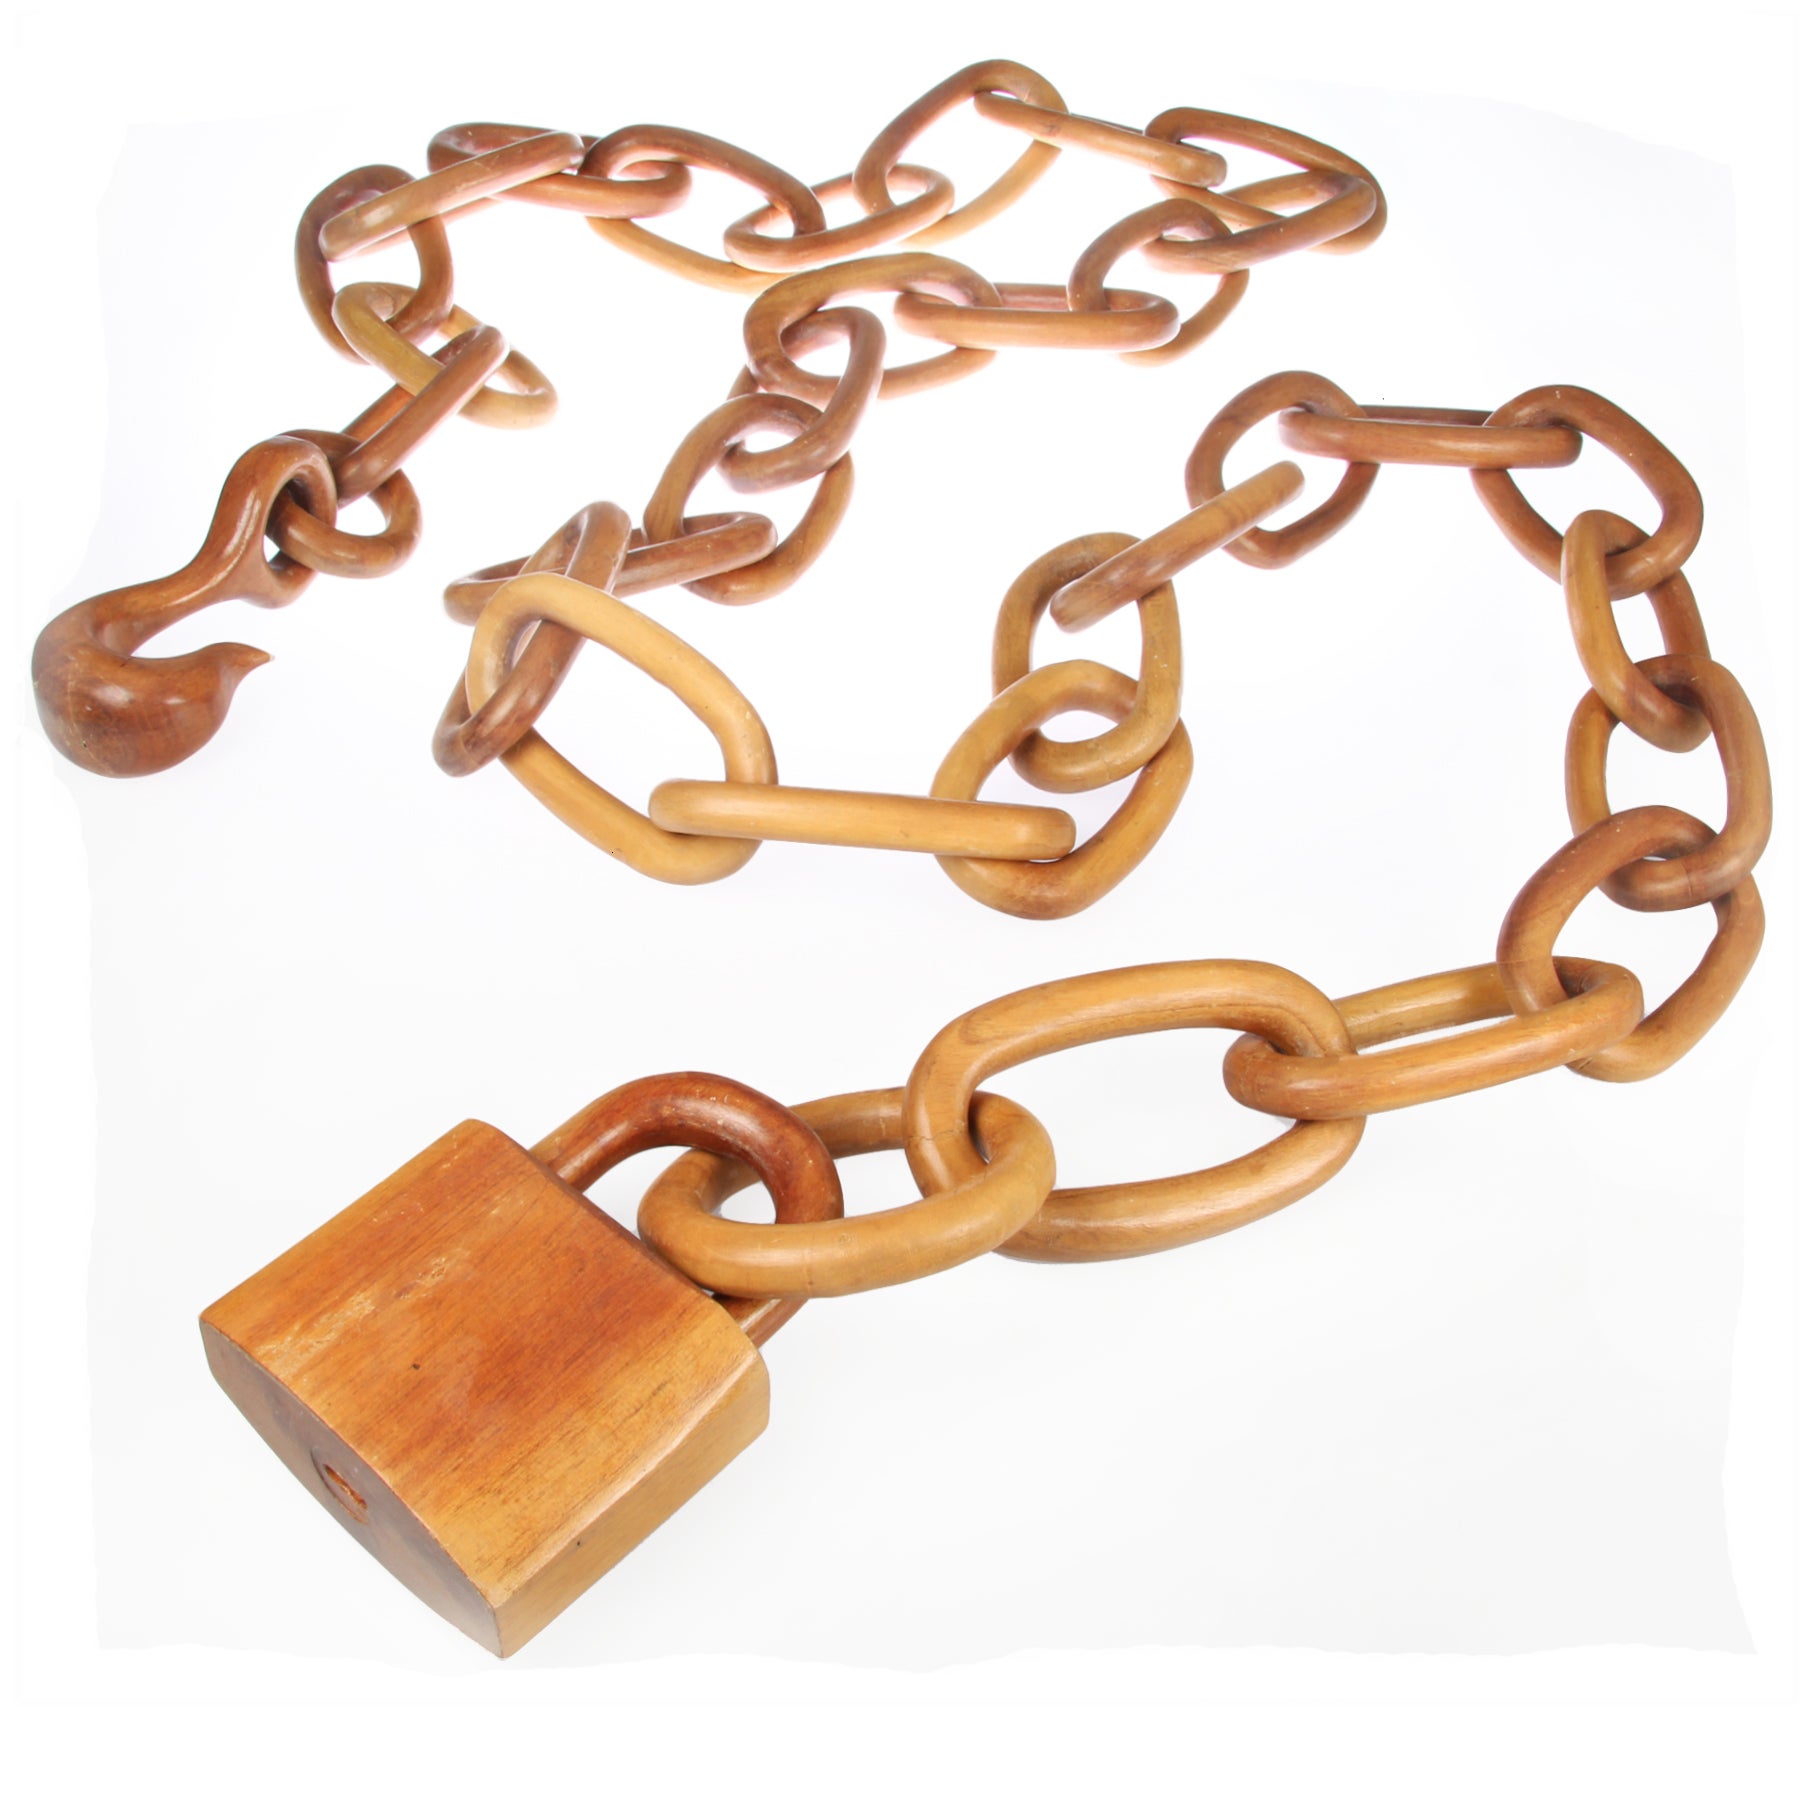 An Oversized Folk Art  Carved Wood Linked Chain with Padlock